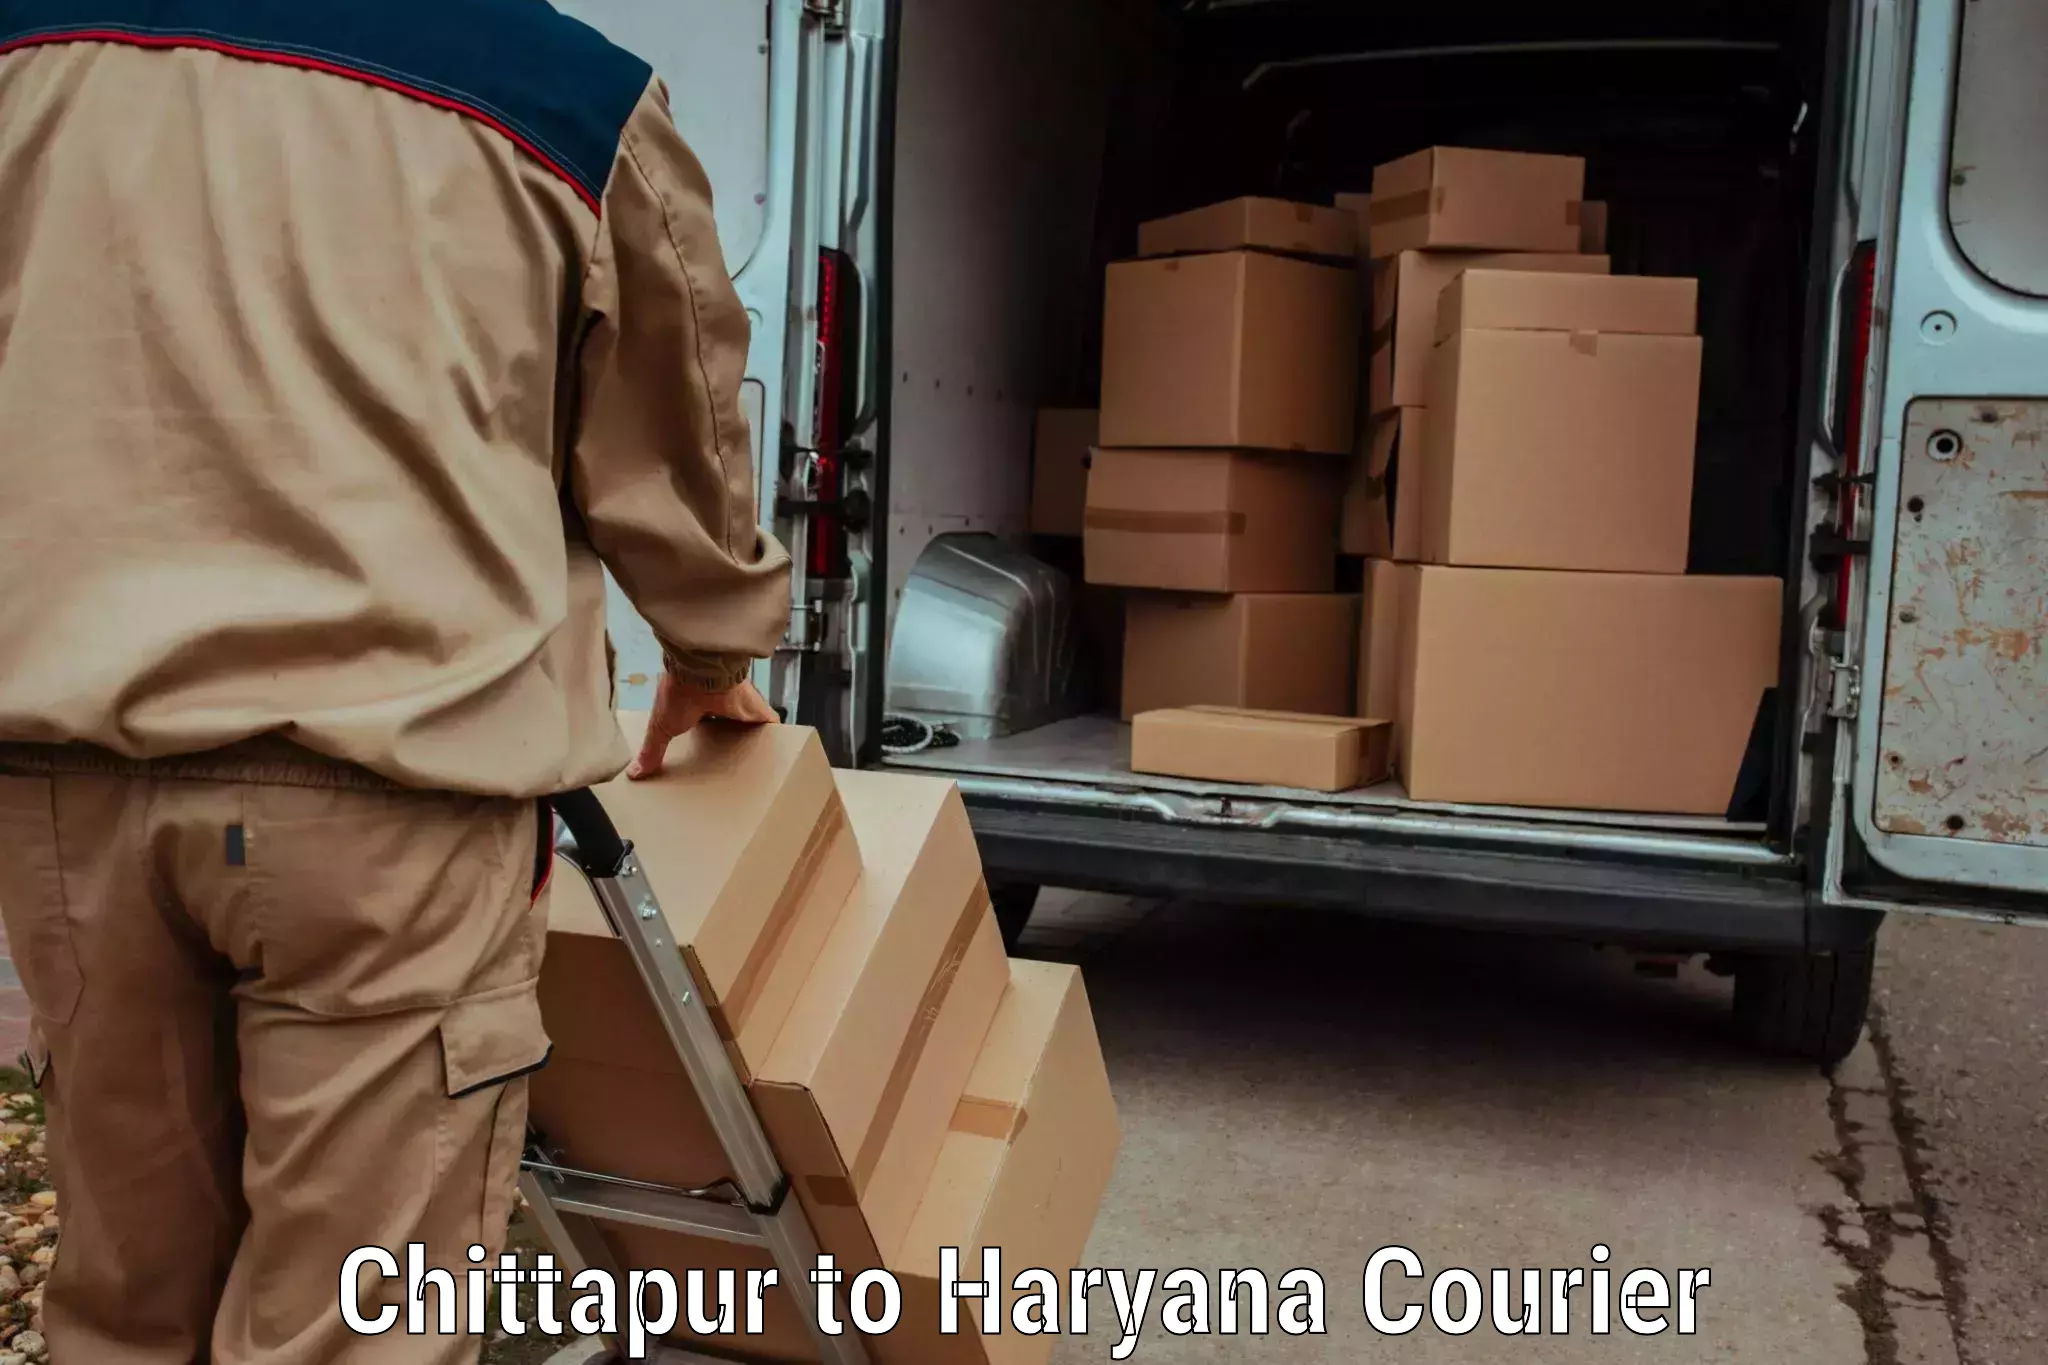 Lightweight parcel options Chittapur to Pinjore